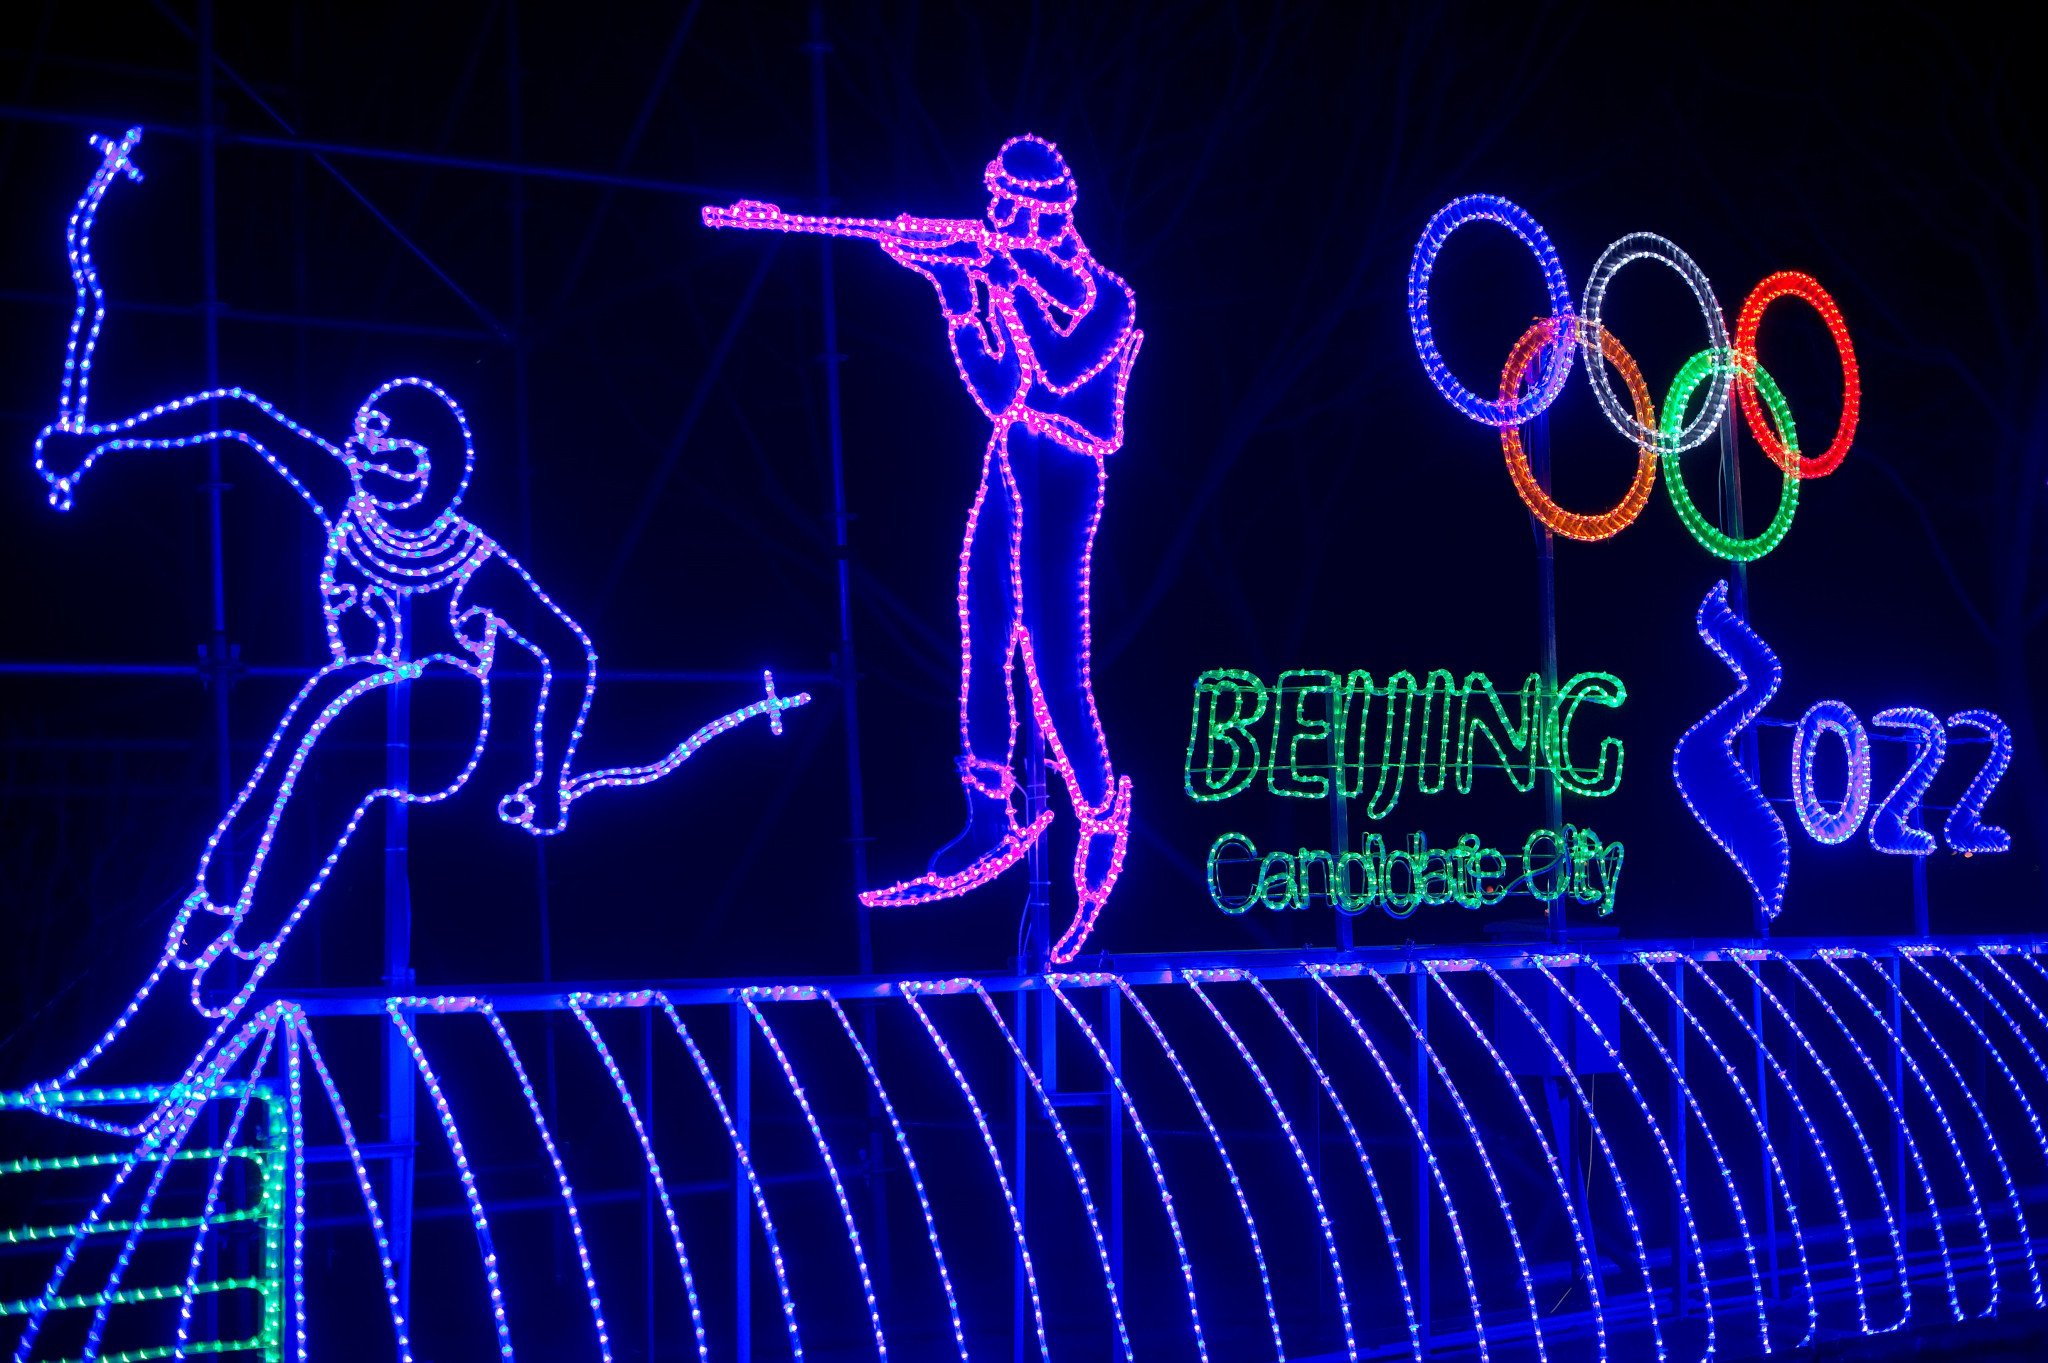 Beijing won the 2022 Winter Olympic bid race ©Getty Images